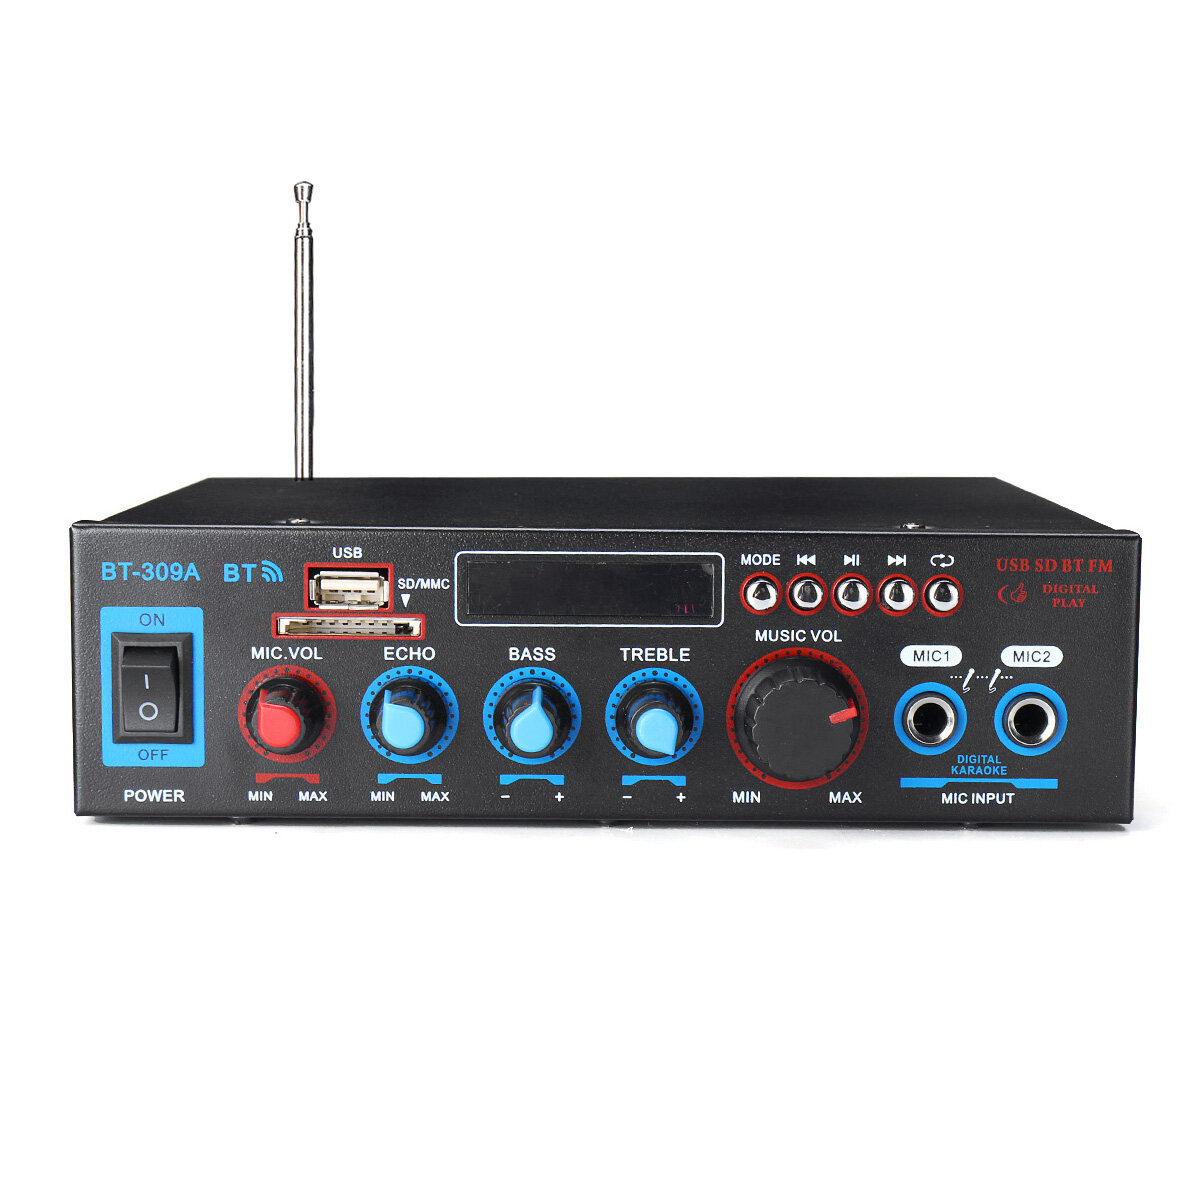 BT-309A 220V 800W 2CH Home Stereo bluetooth Versterker Ondersteuning USB FM AUX MIC Microfoon